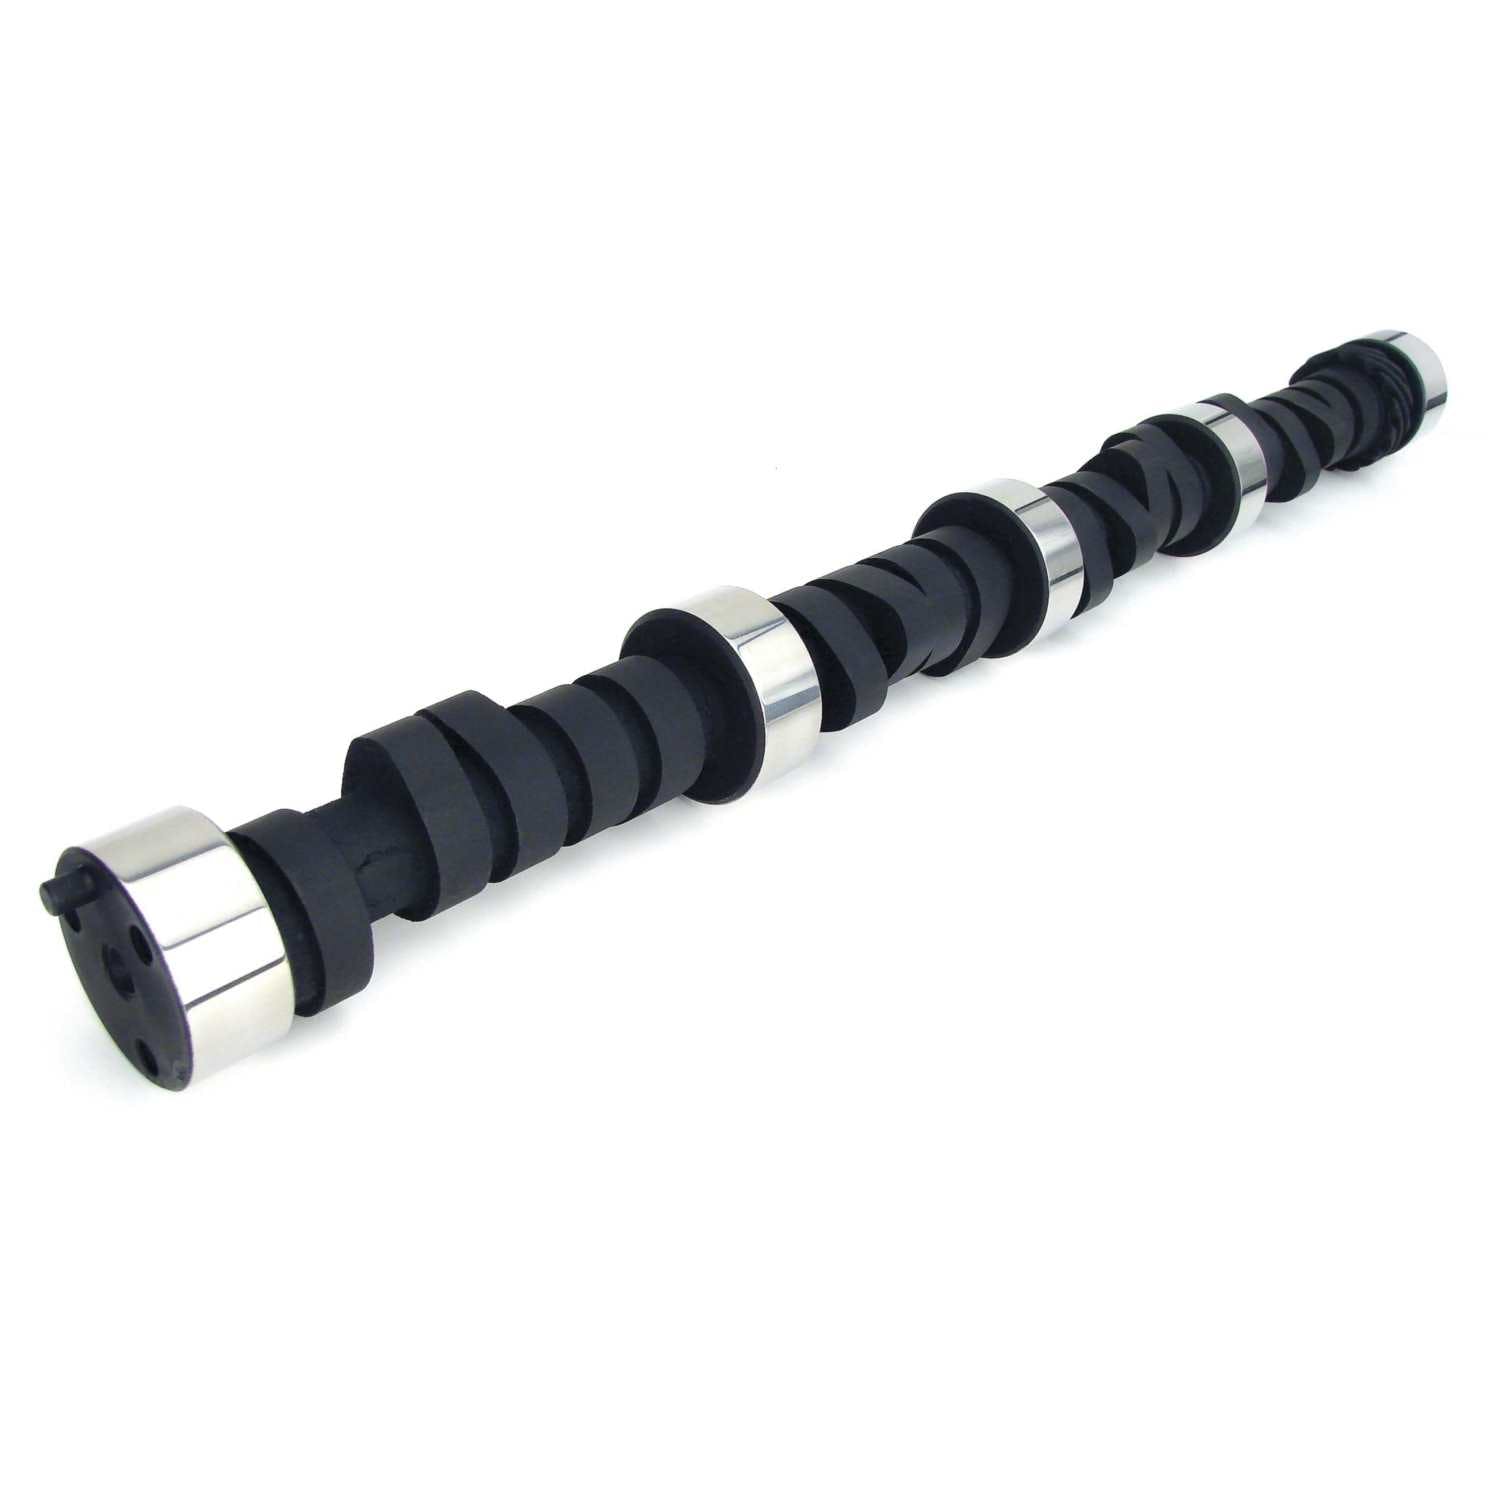 Competition Cams 11-243-4 Xtreme 4 X 4 Camshaft